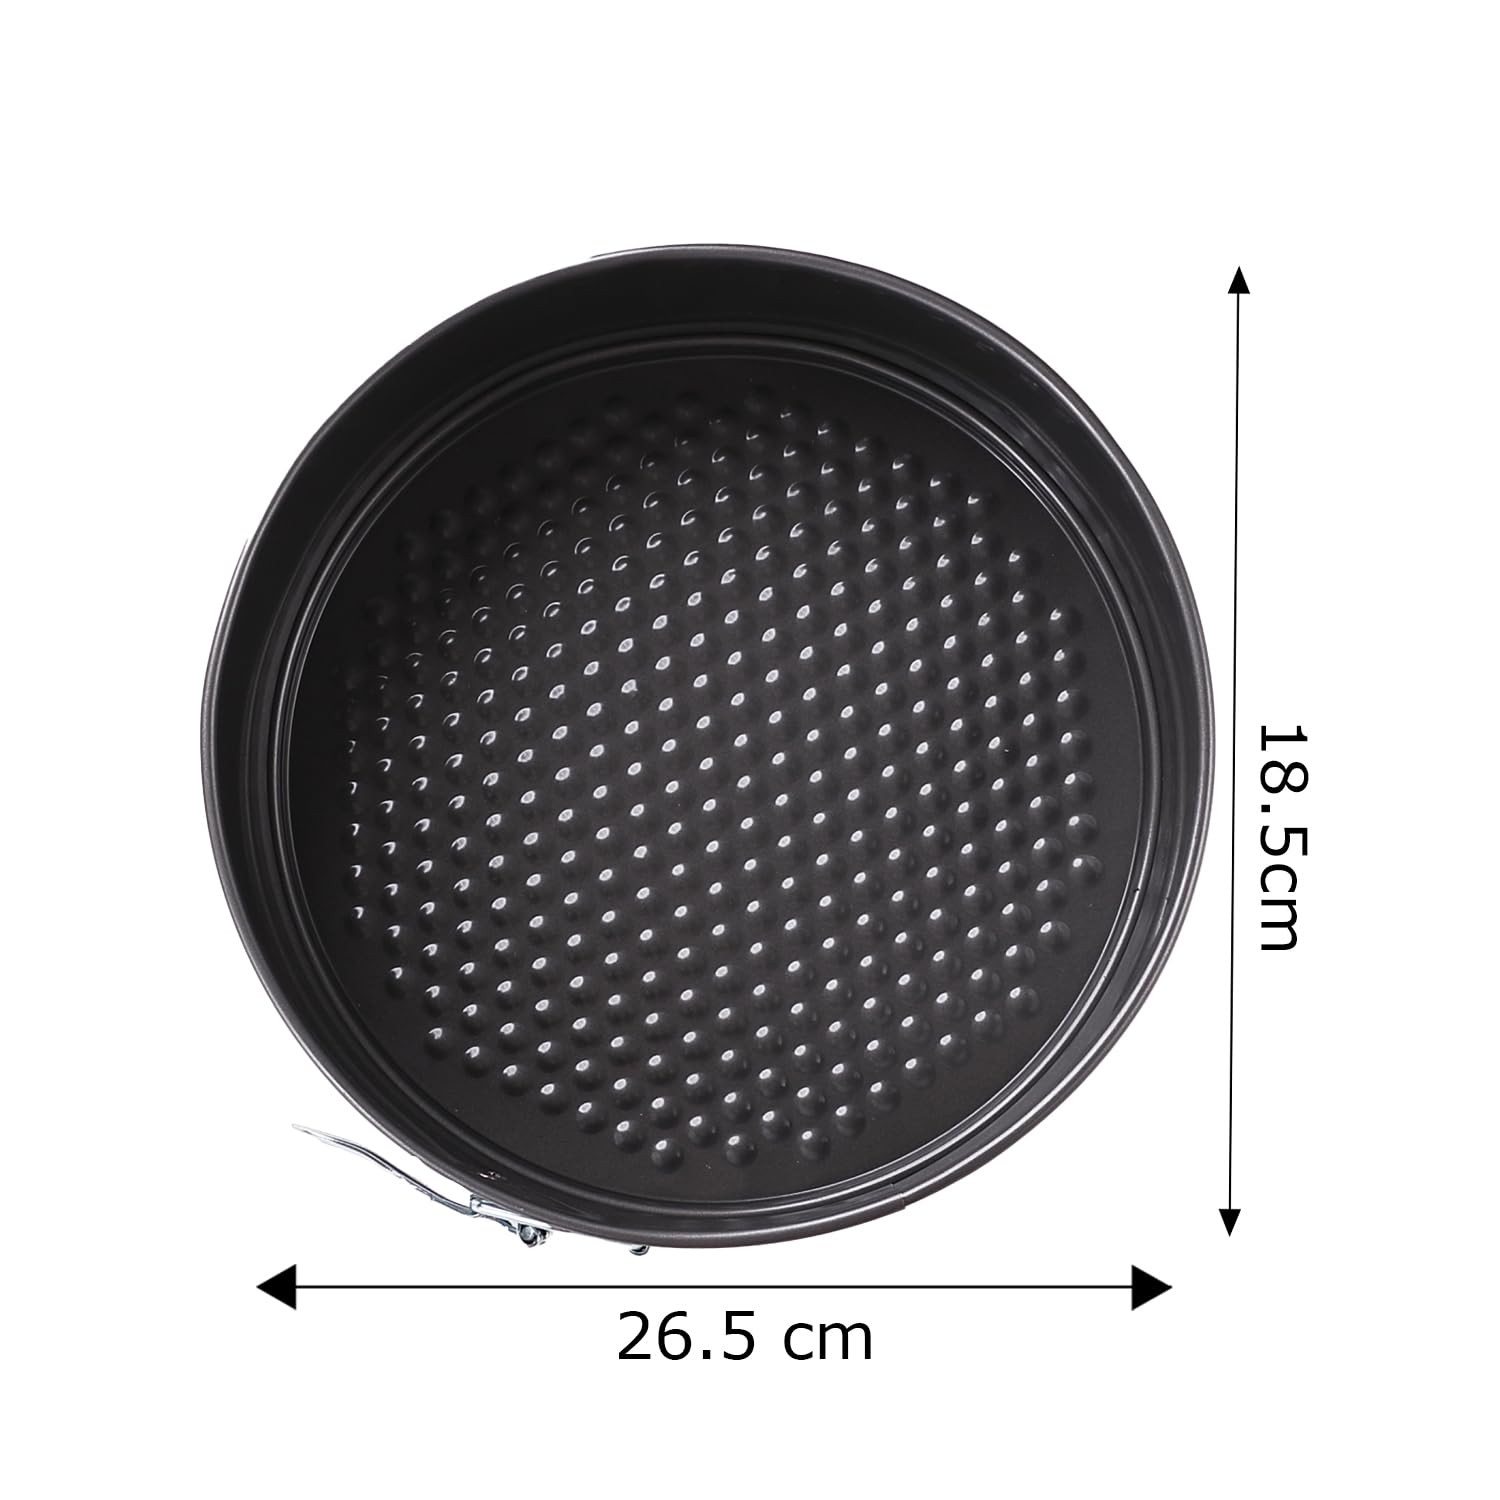 Kuber Industries Cake Mould with Removable Base|Cake Tray for Baking|Idol for Bread, Pie, Pizza (Black)